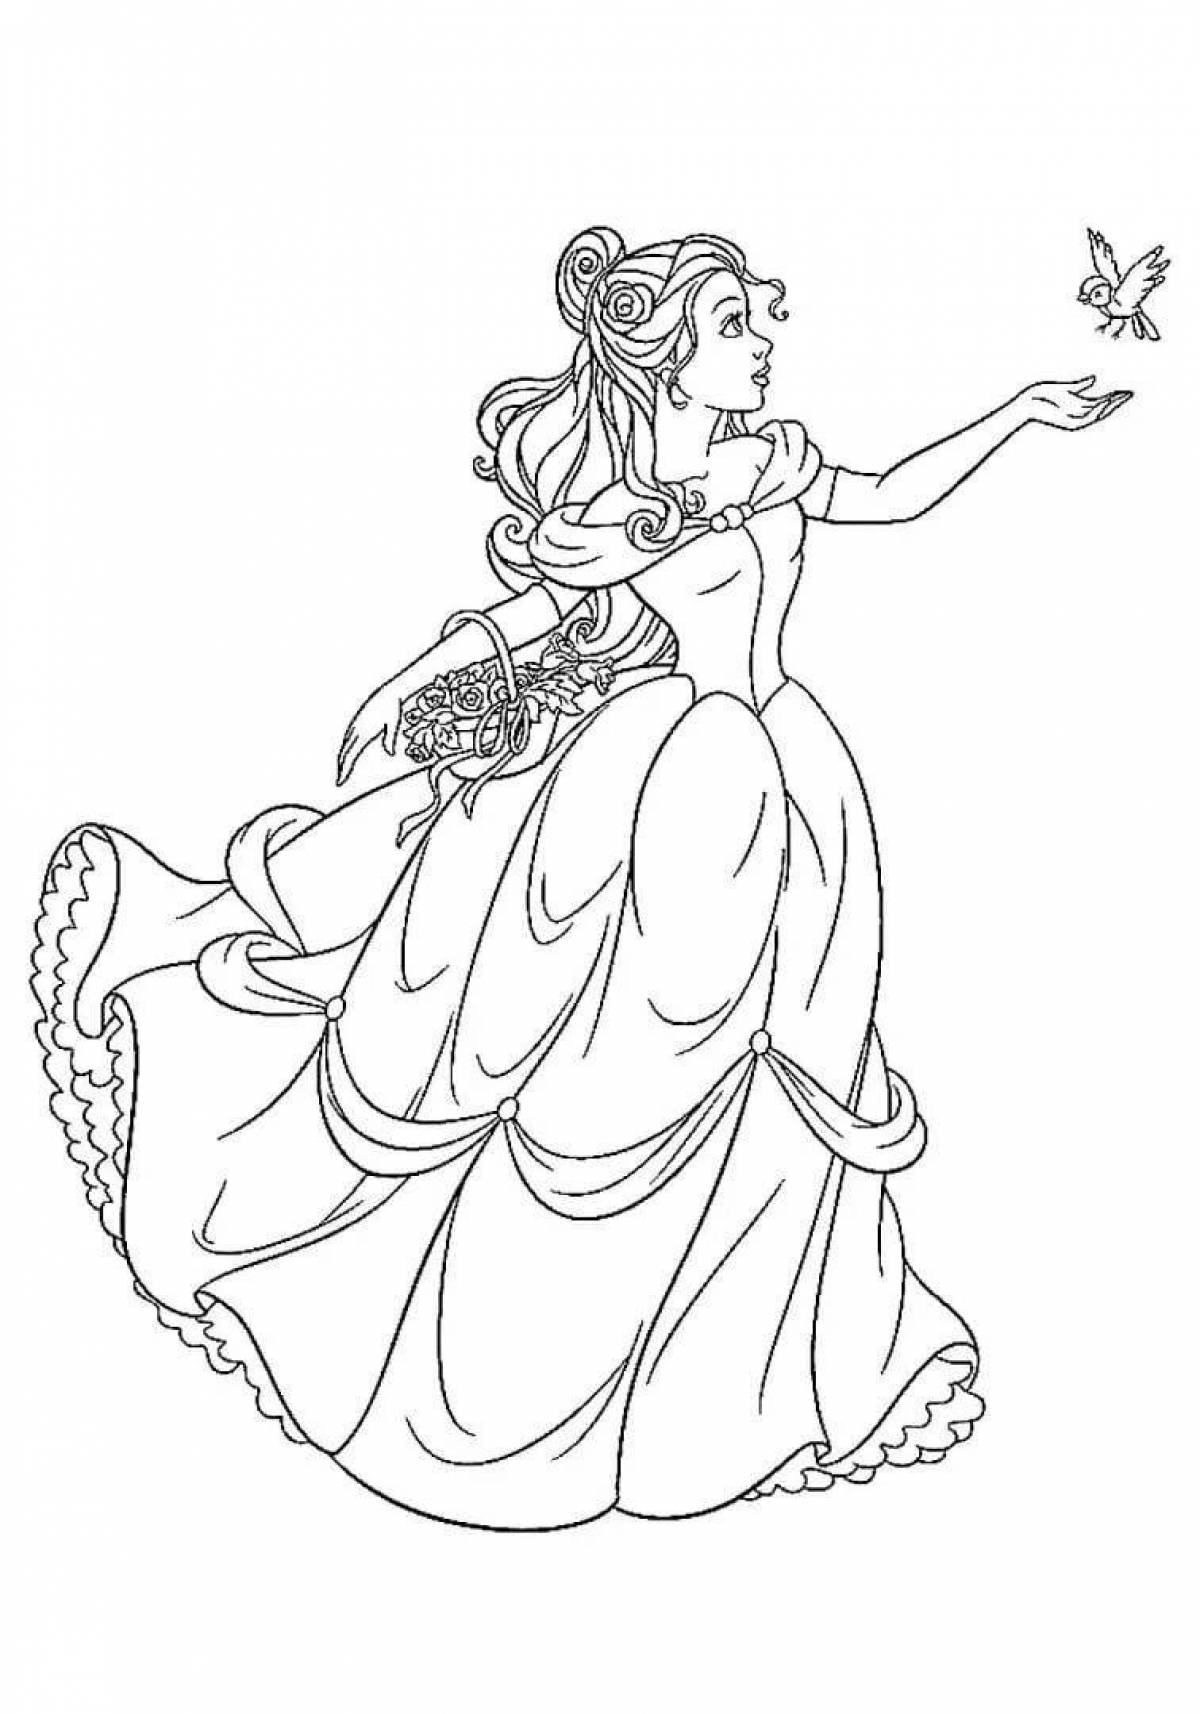 Coloring page adorable belle and the monster